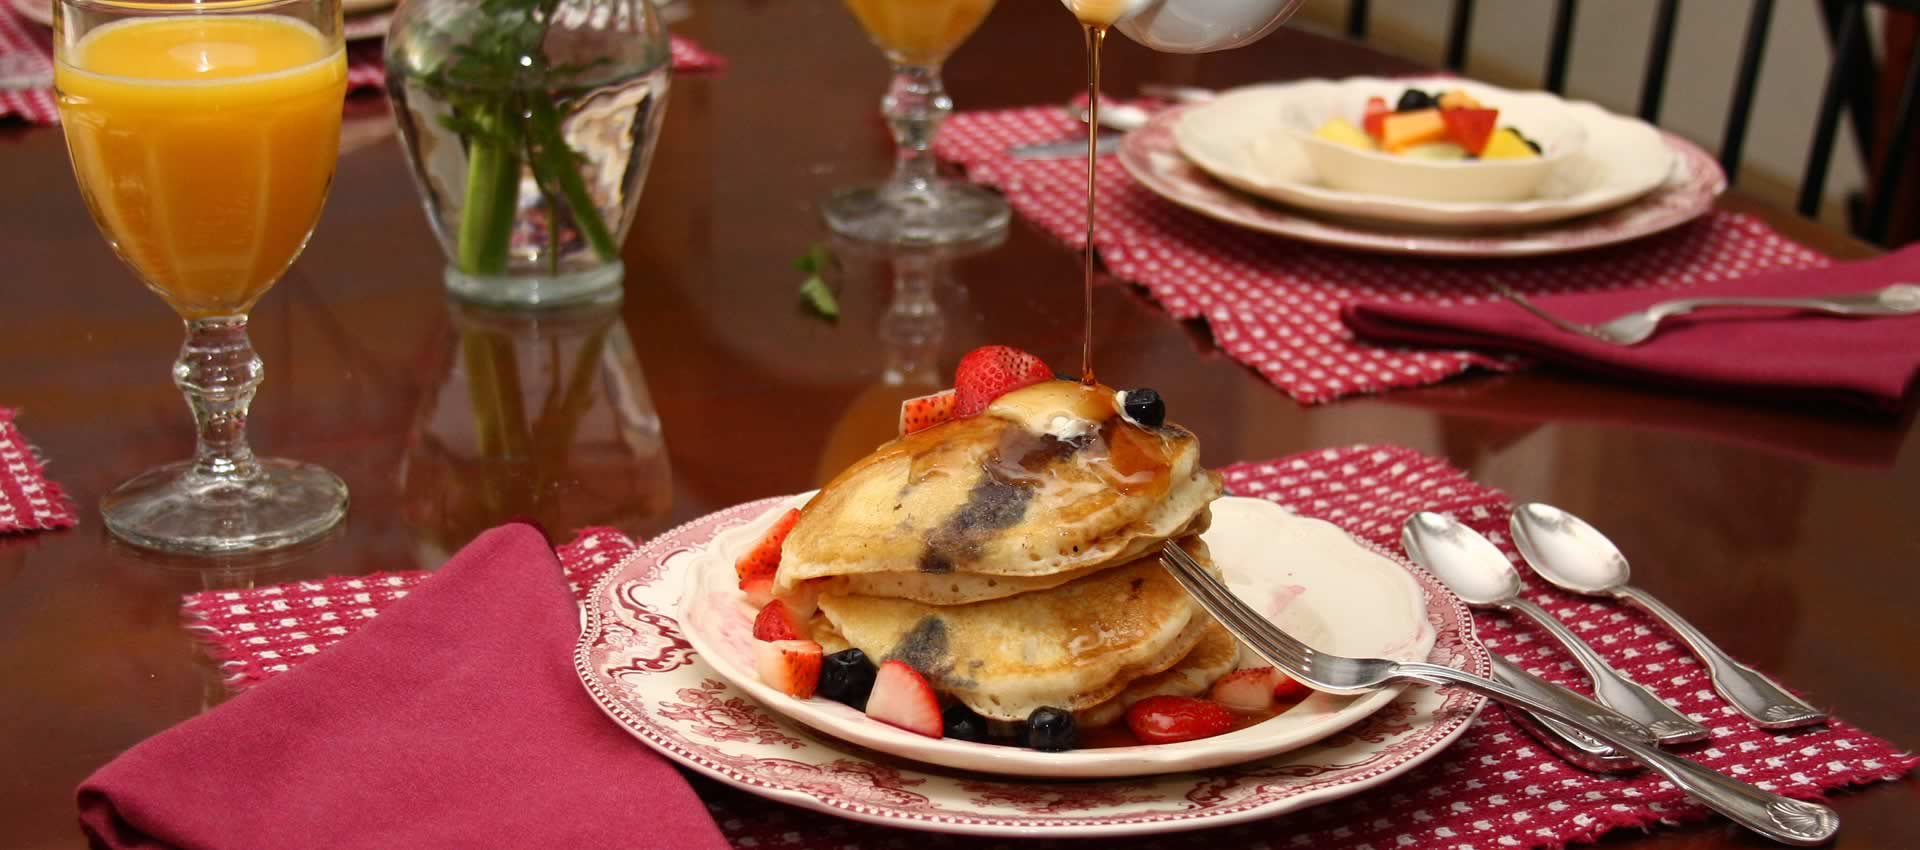 Bafferton Breakfast dish, syrup being poured over strawberry pancakes